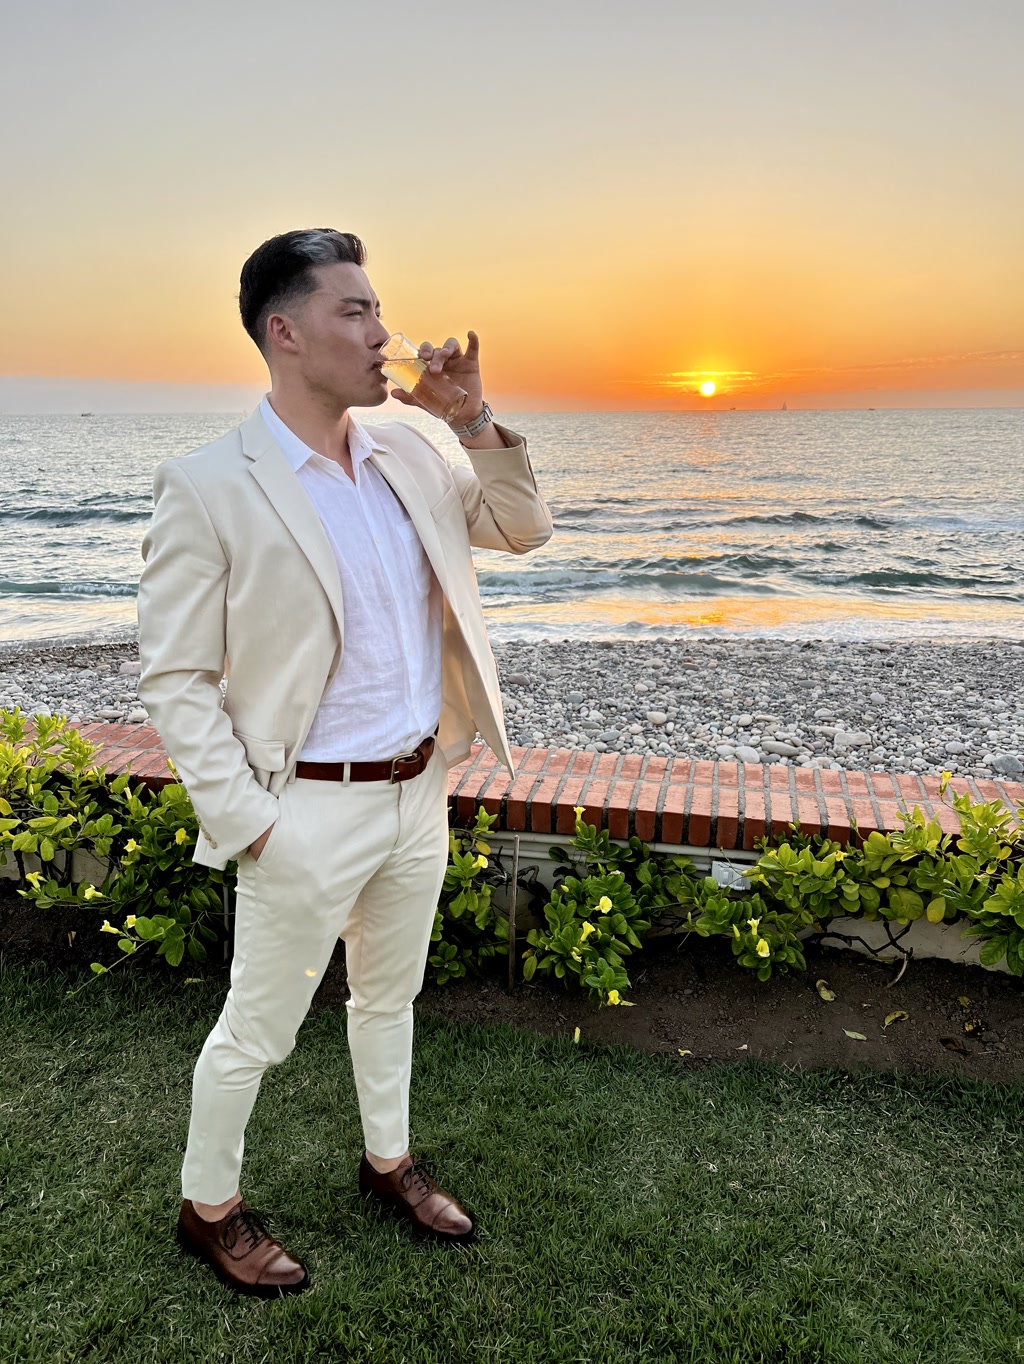 A person is standing on a grassy area in front of a beach during sunset, elegantly dressed in a cream-colored suit with a white shirt. They are holding a drink in a glass and appear to be sipping from it while enjoying the view. The ocean appears calm, and the sky is painted with hues of orange and blue as the sun sets on the horizon. Gentle waves can be seen touching the shoreline. There is a line of green shrubs behind the person and an unoccupied pebble border in the foreground.